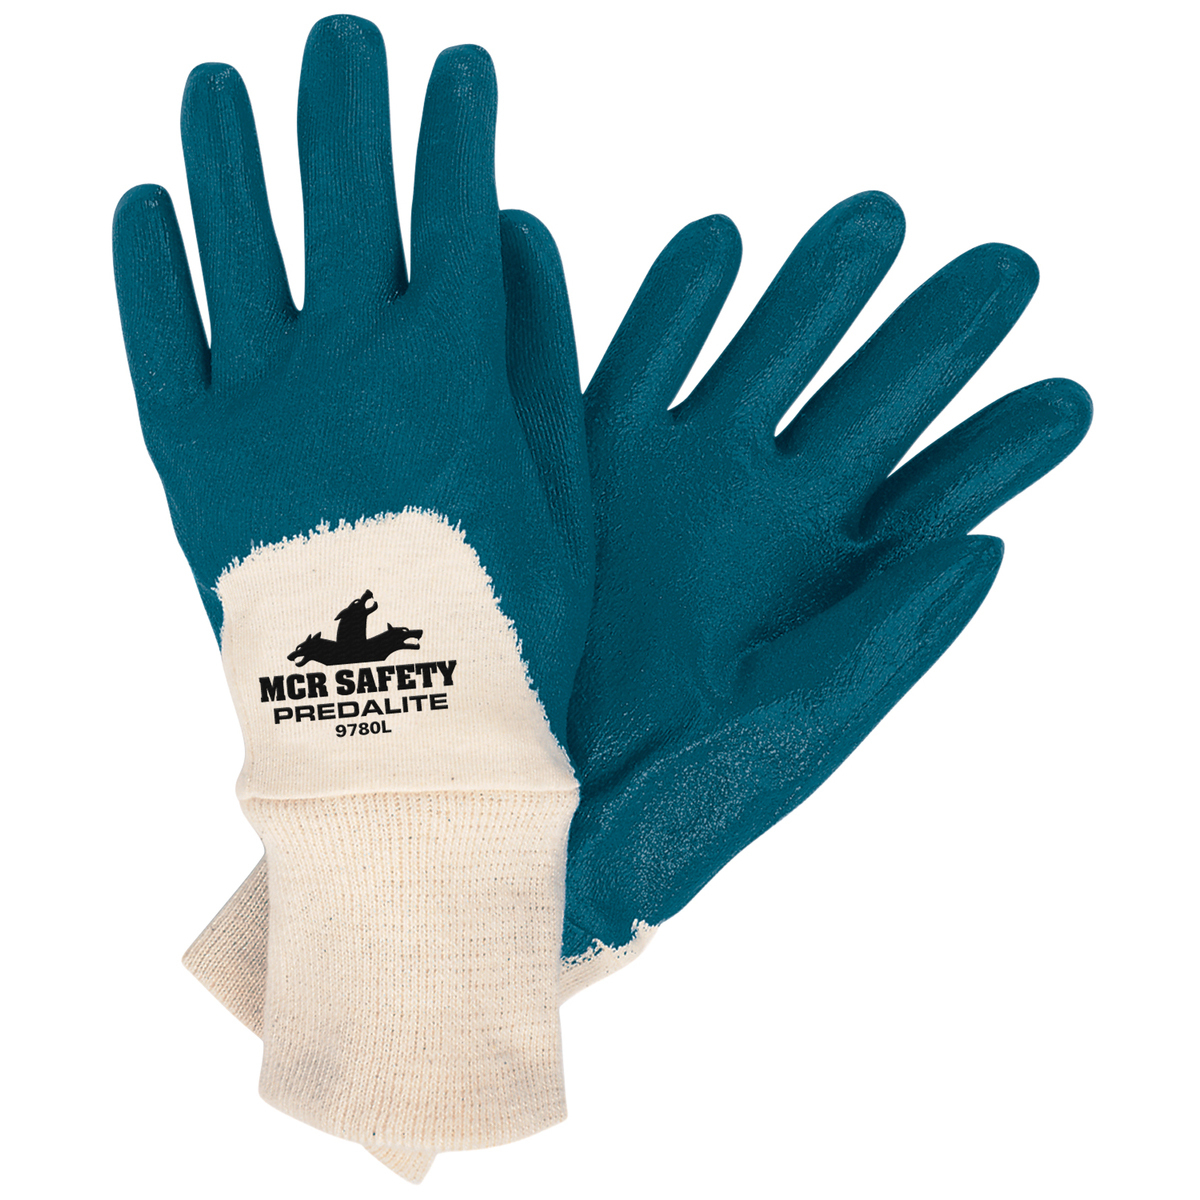 MCR Safety® X-Large Predalite® Blue Light Nitrile Three-Quarter Coating Work Gloves With Natural Interlock Liner And Knit Wrist